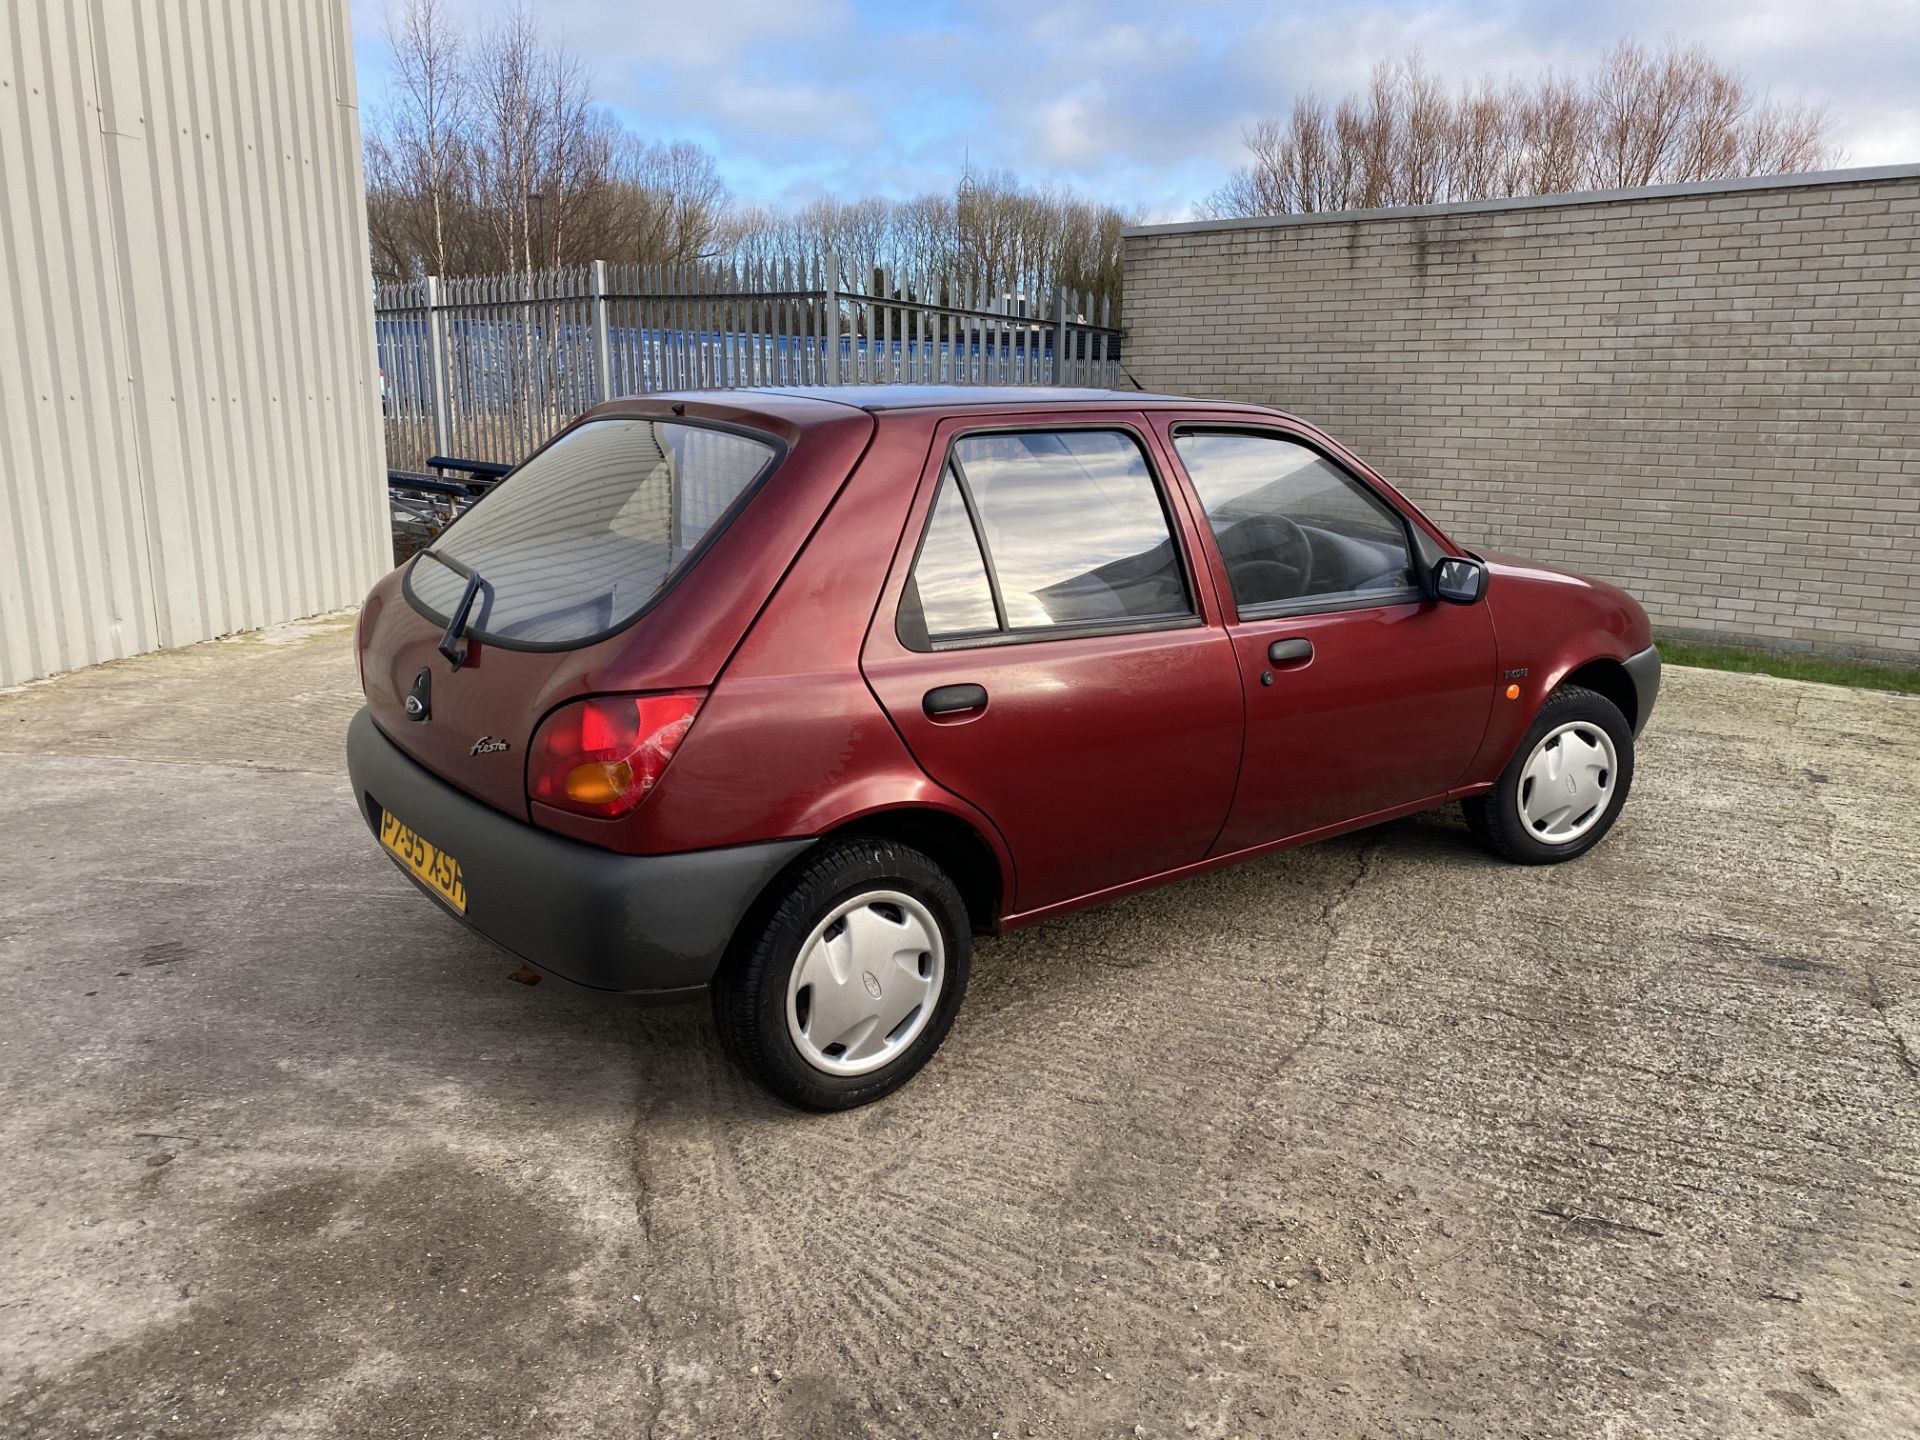 Ford Fiesta - Image 4 of 25